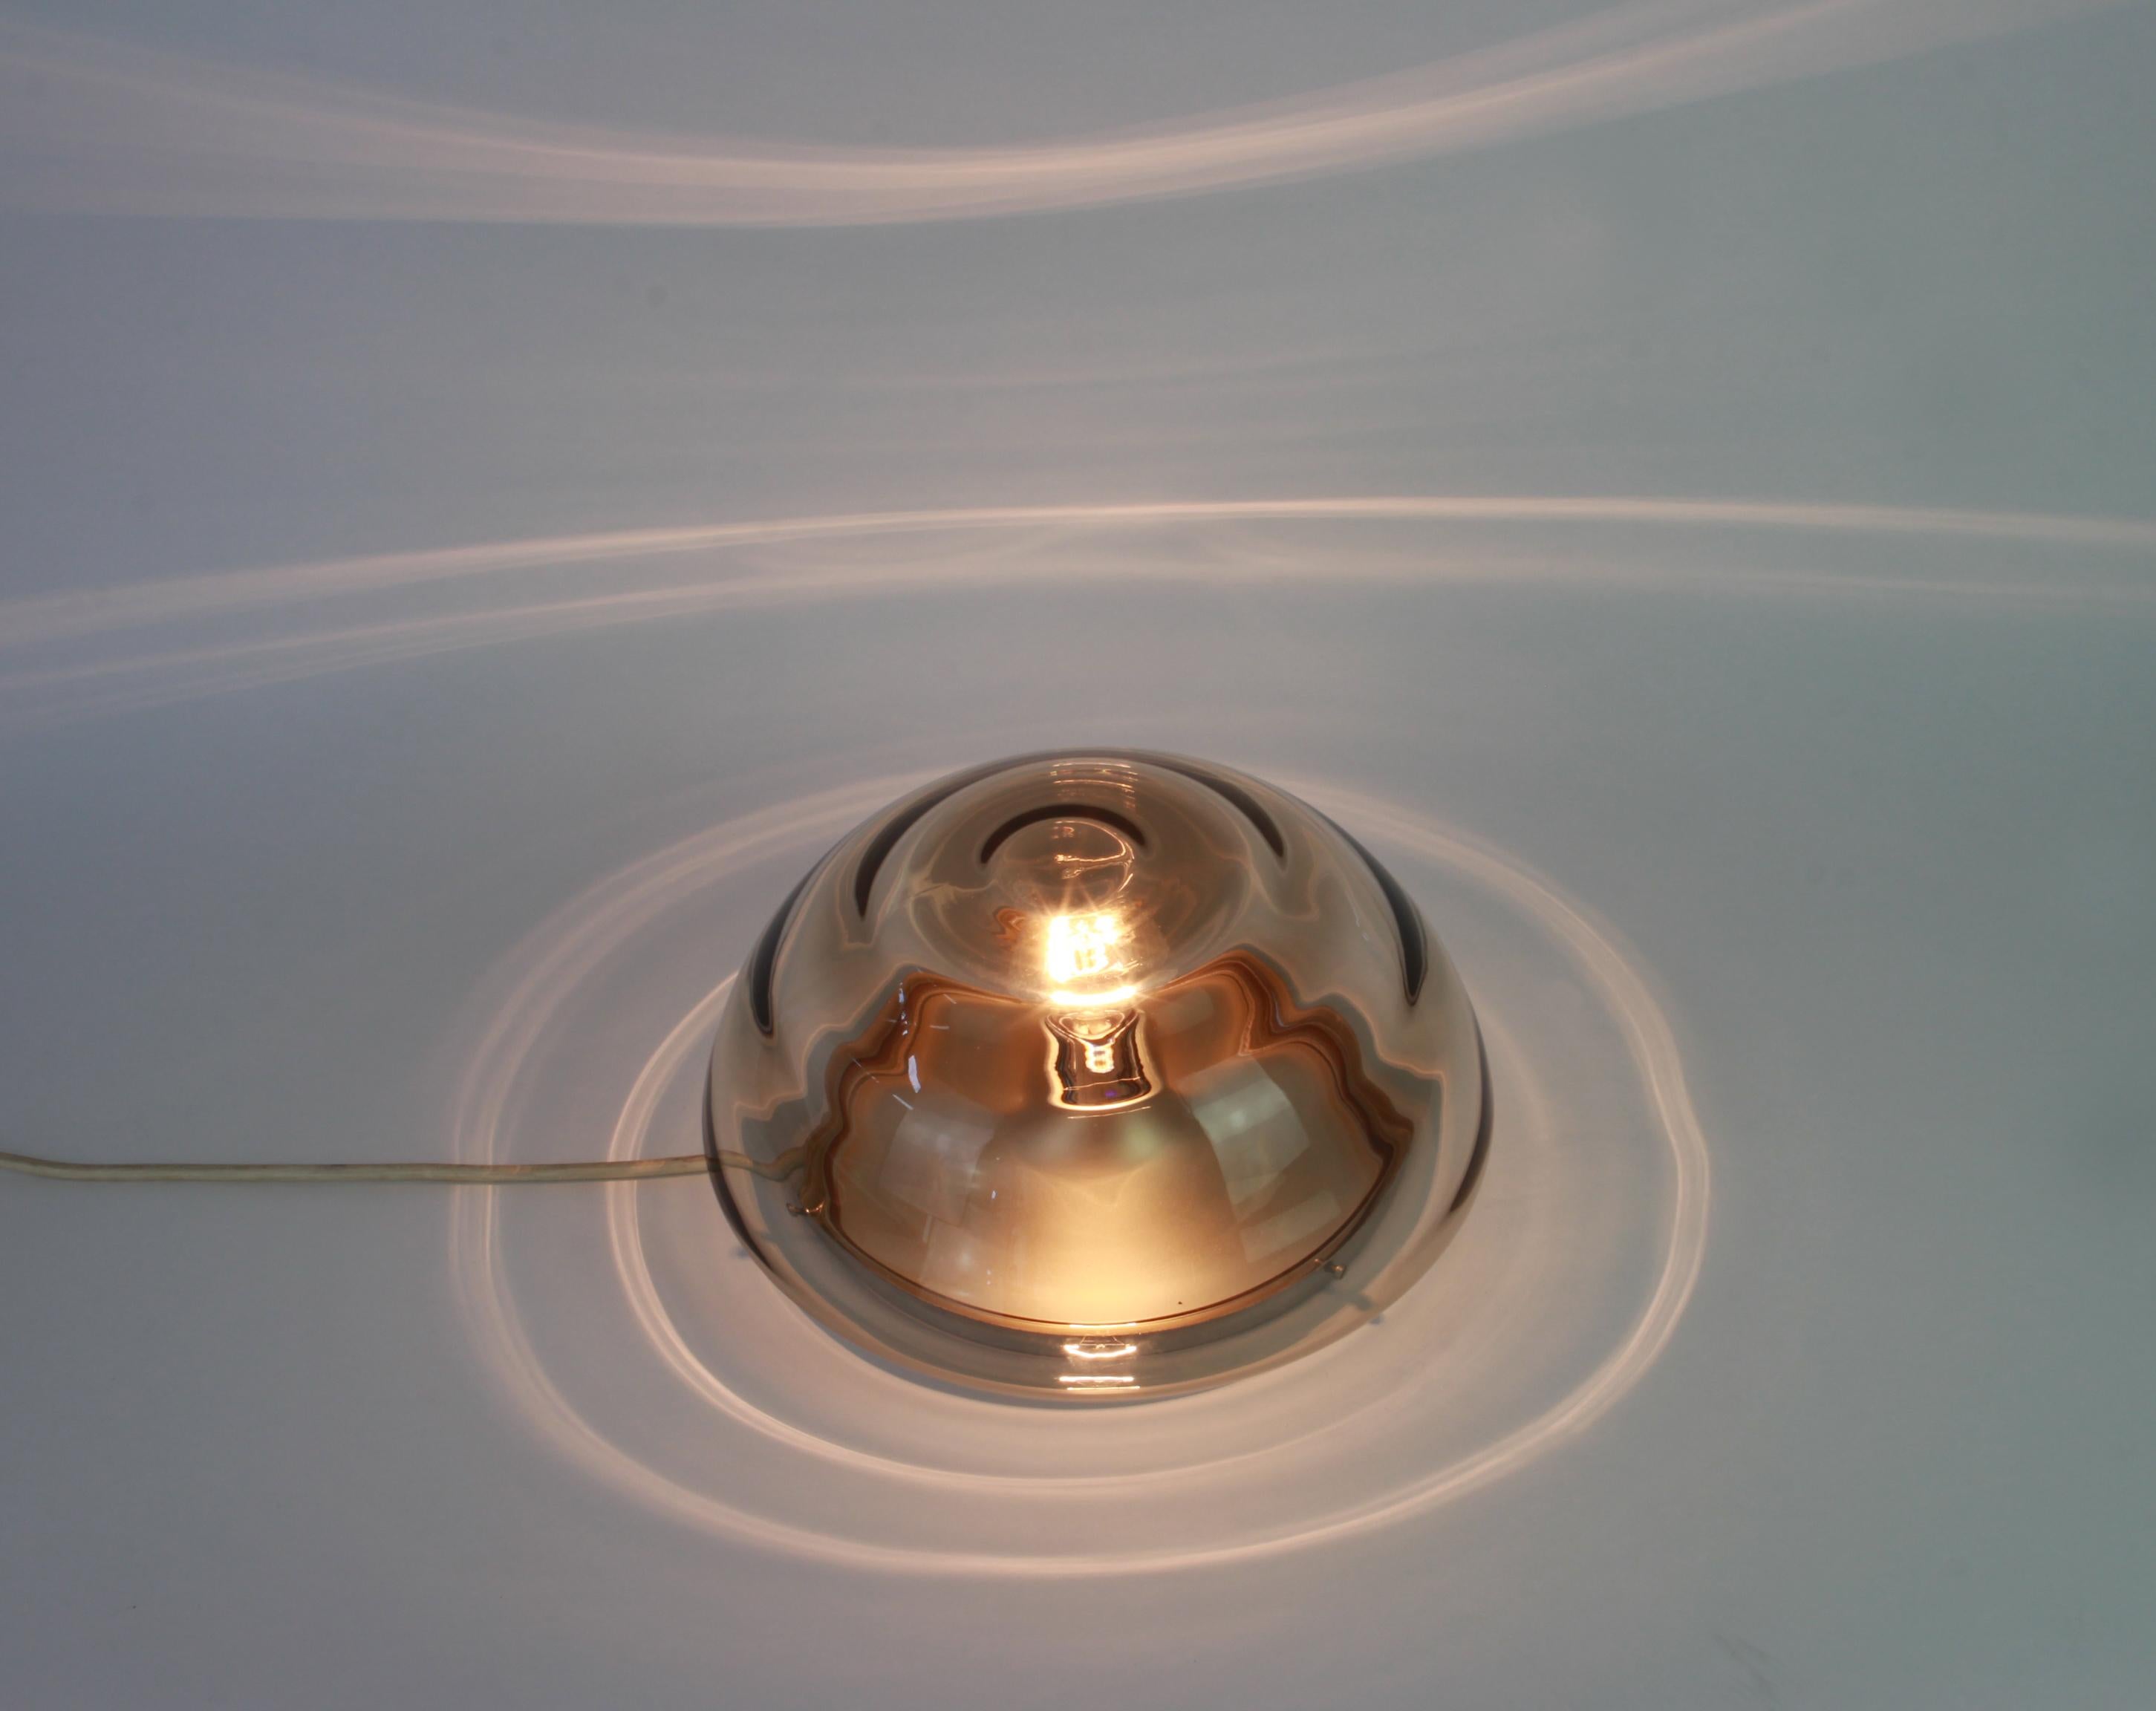 Vintage Sputnik lamp from the 1970s manufactured by Cosack, Germany, 1970s.
This lamp can be used as a ceiling lamp, or as a wall lamp.
Wonderful Murano glass shape.
Sockets: 1 x E27 standard Bulb and function on voltage from 110 till 240